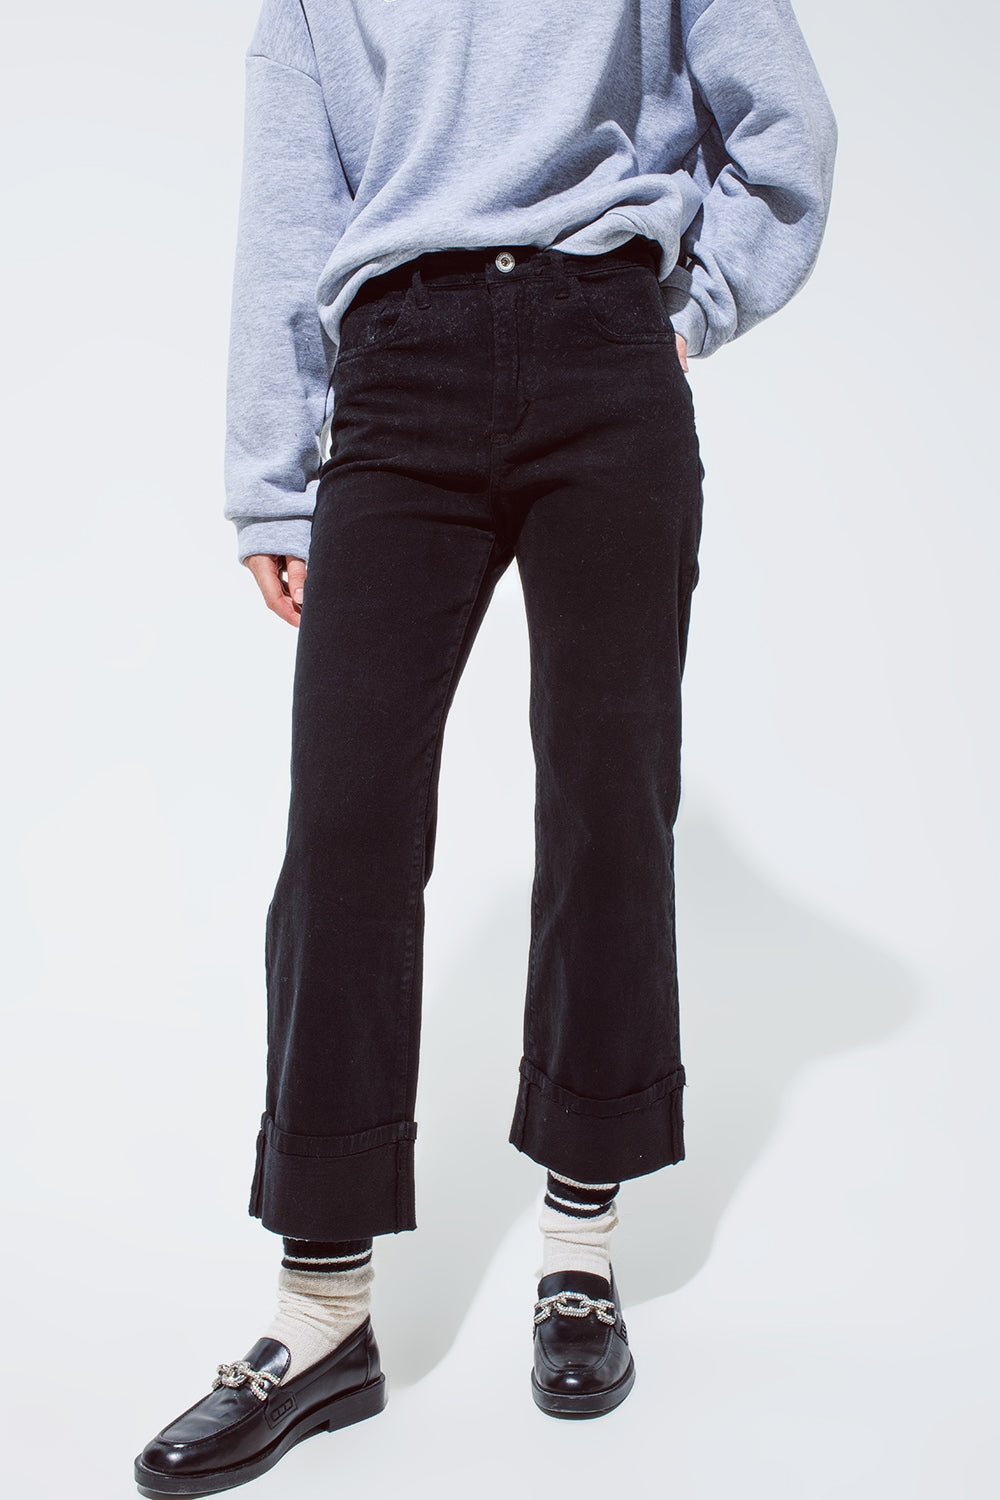 Q2 Straight leg jeans in black with folded trouser legs